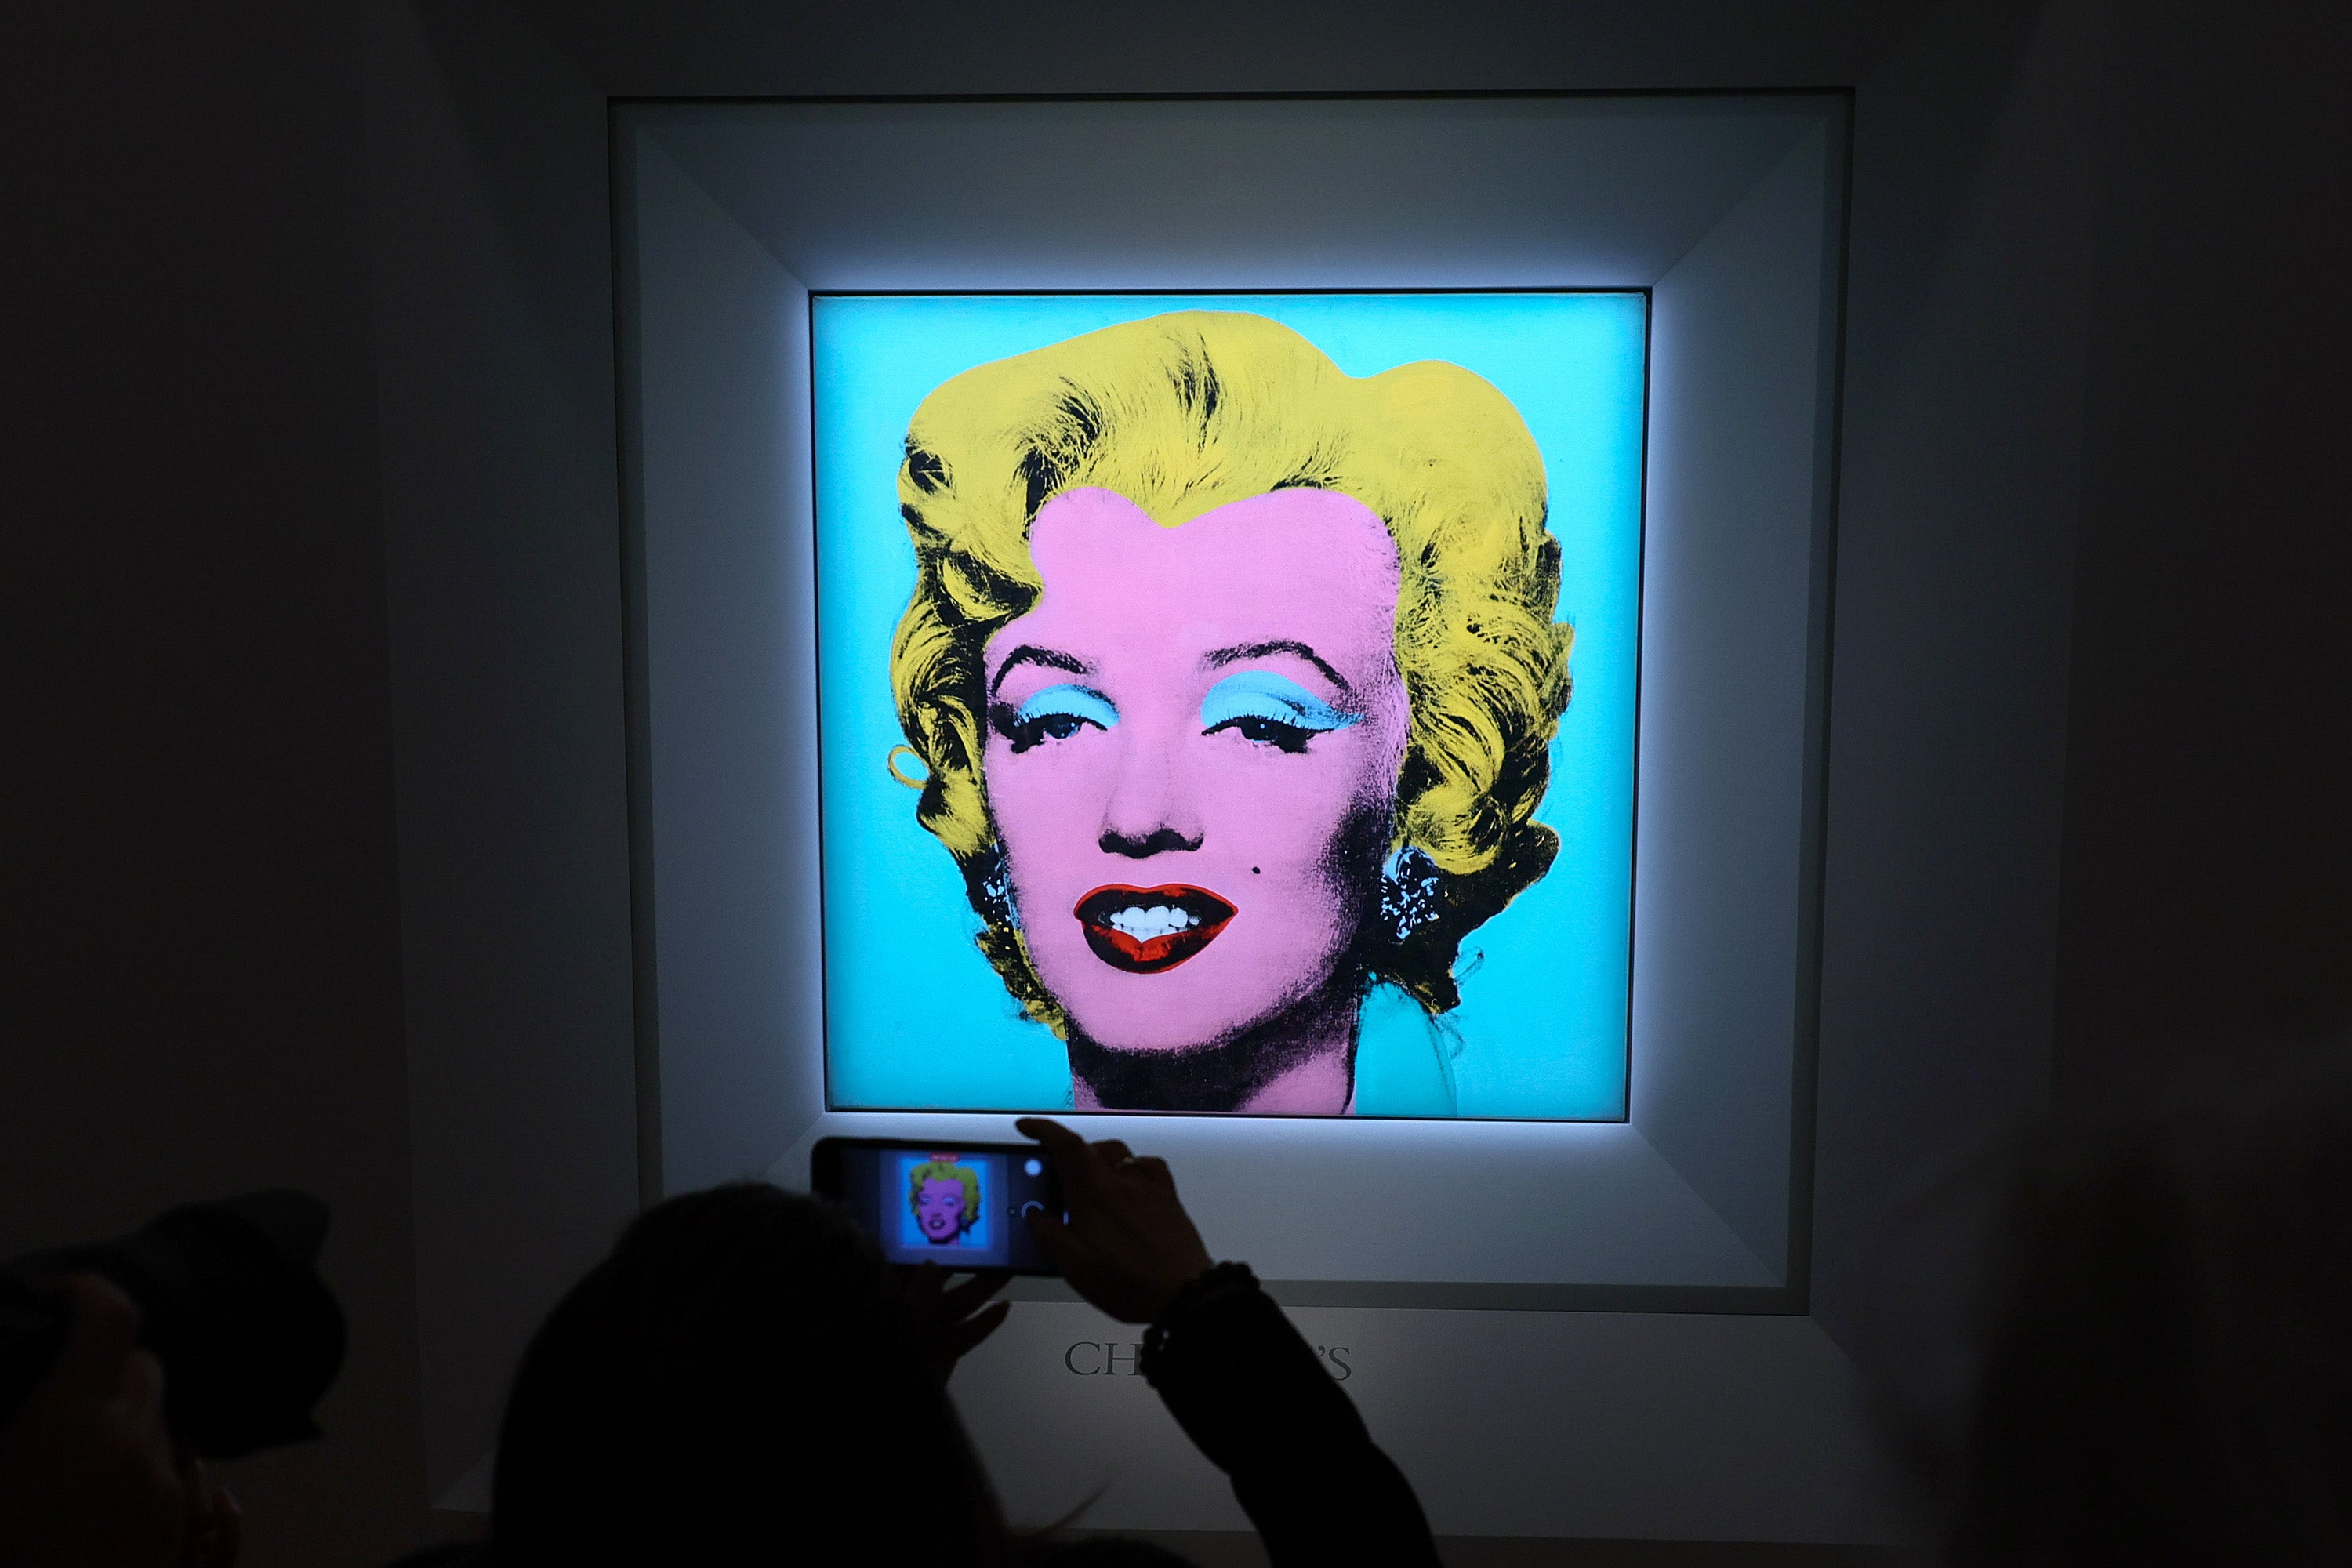 Warhol’s iconic portrait ‘Shot Sage Blue Marilyn’, which is due to go on sale at Christie’s in May